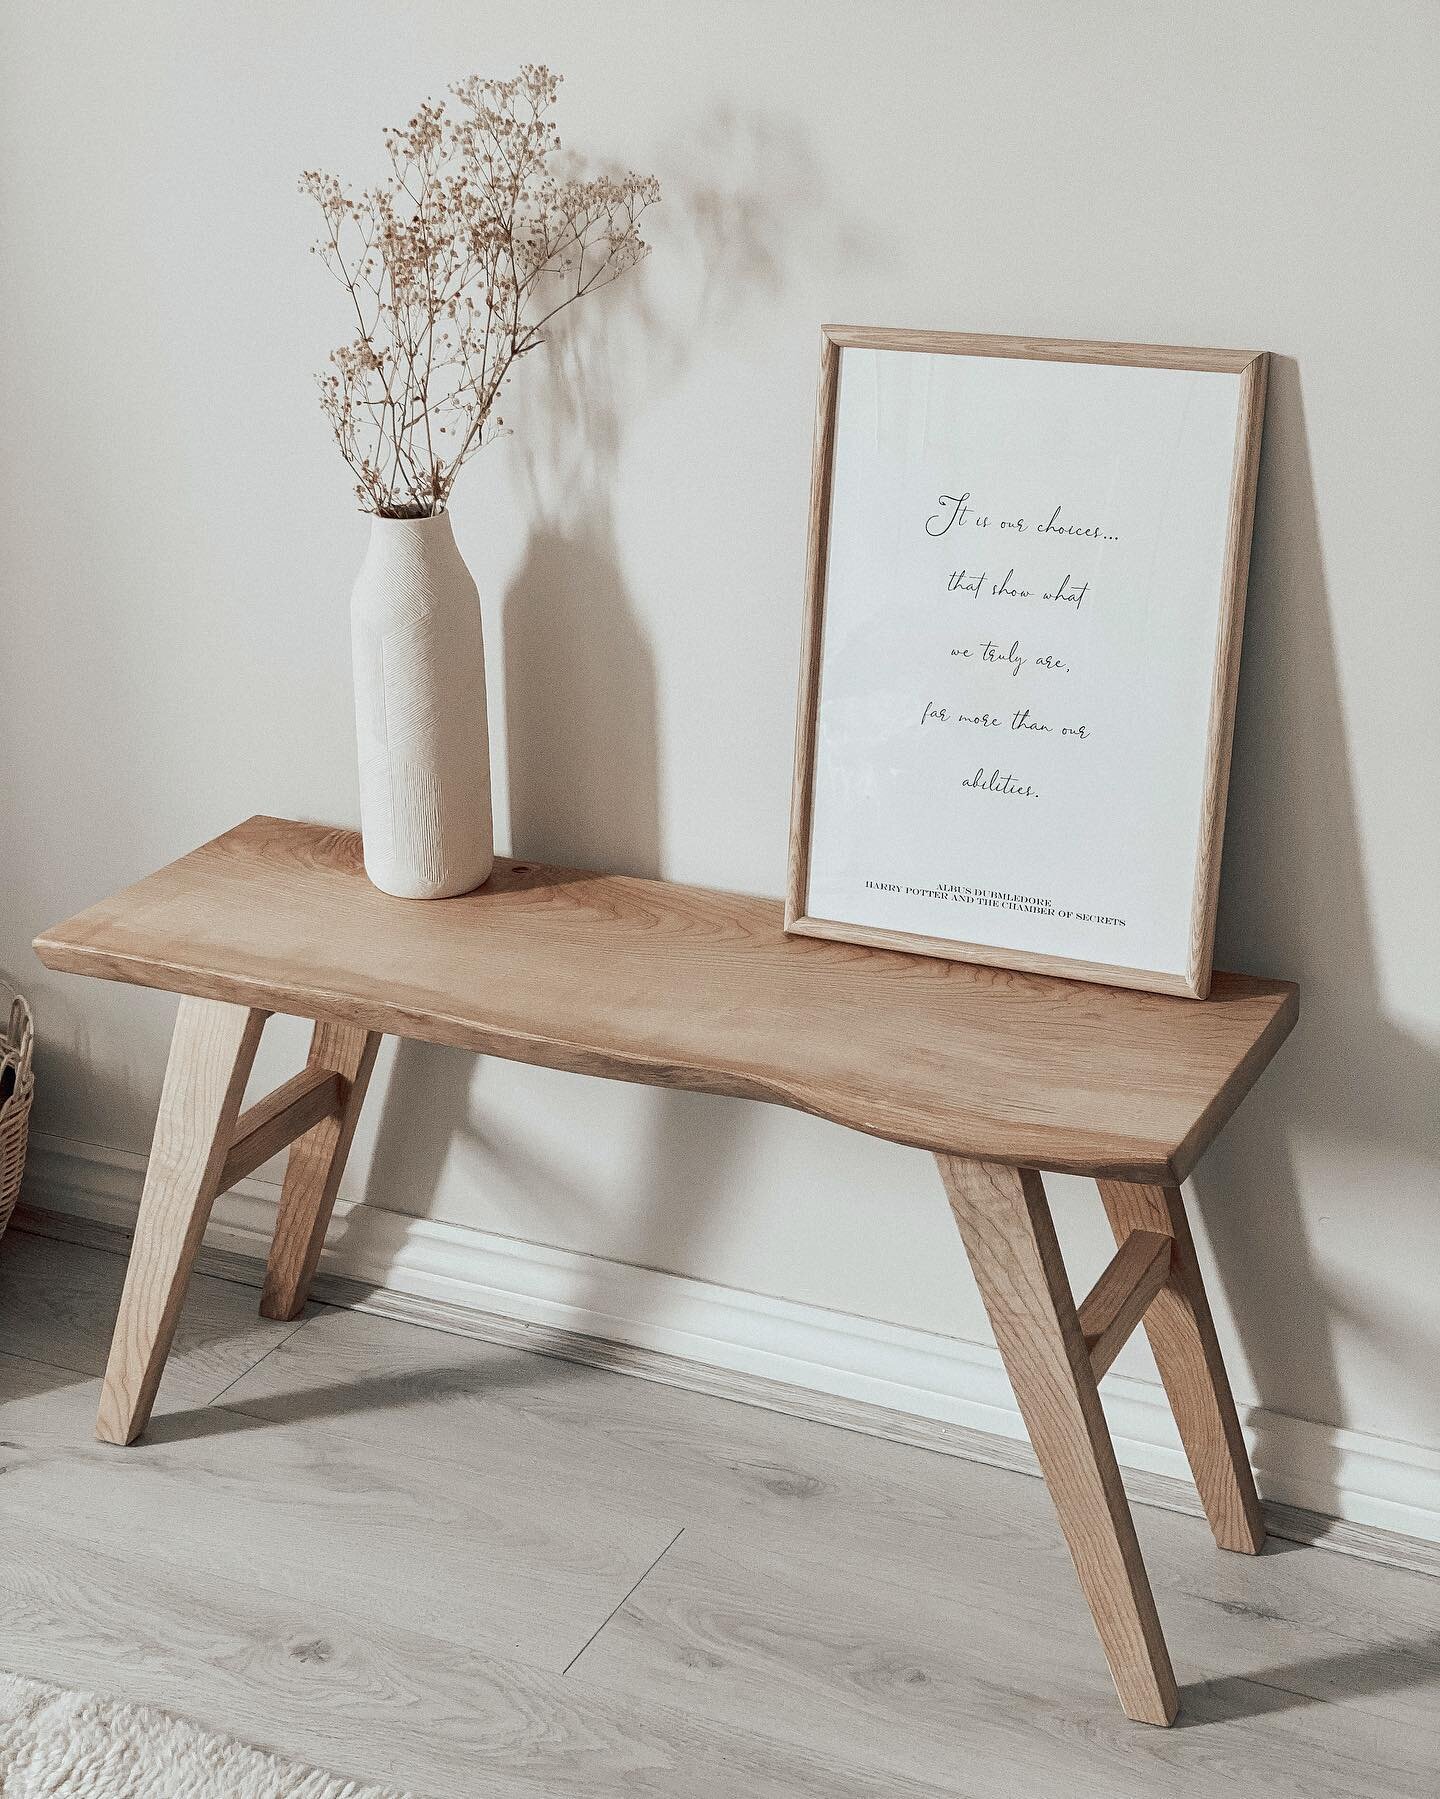 Rowan 💛 Our pocket rocket bench! The perfect size for an entryway or to style up a cosy corner.. ✨

We craft this entirely from a live edge slab of Ash meaning every one is completely unique 😍🙌🏼 

#woodenbench #entrywaydecor #entrywaybench #handm